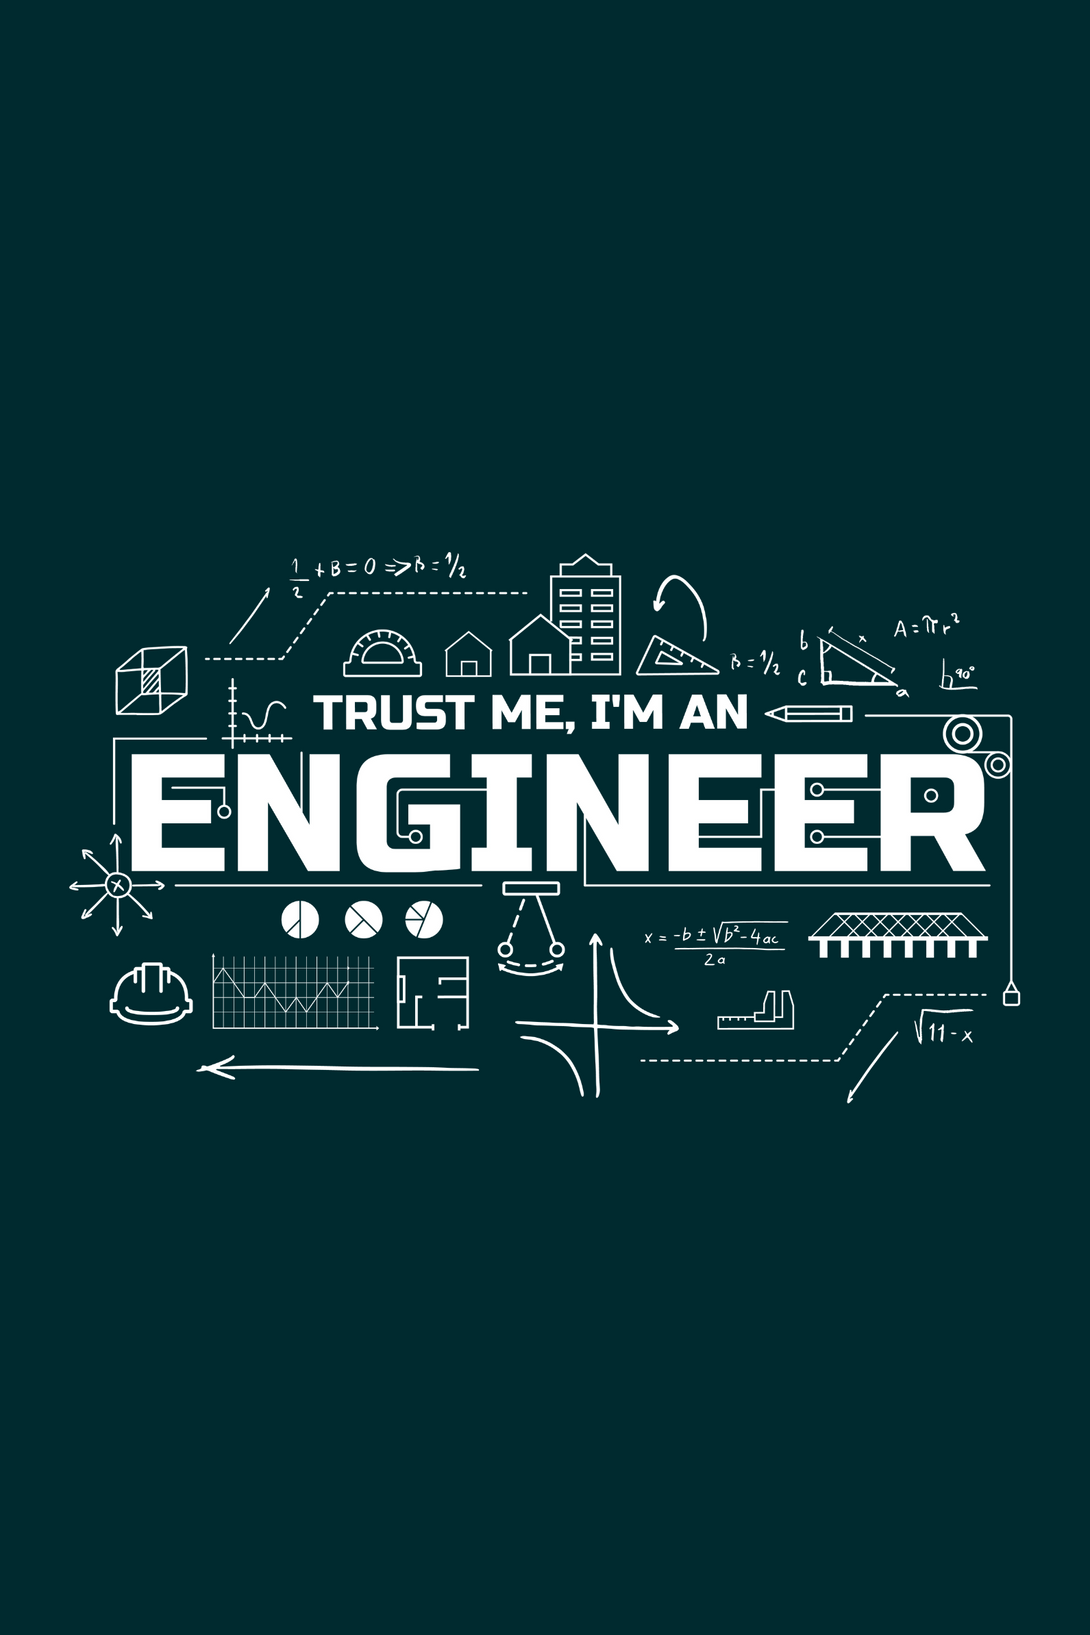 Trust Me, I'M An Engineer Printed T-Shirt For Men - WowWaves - 1